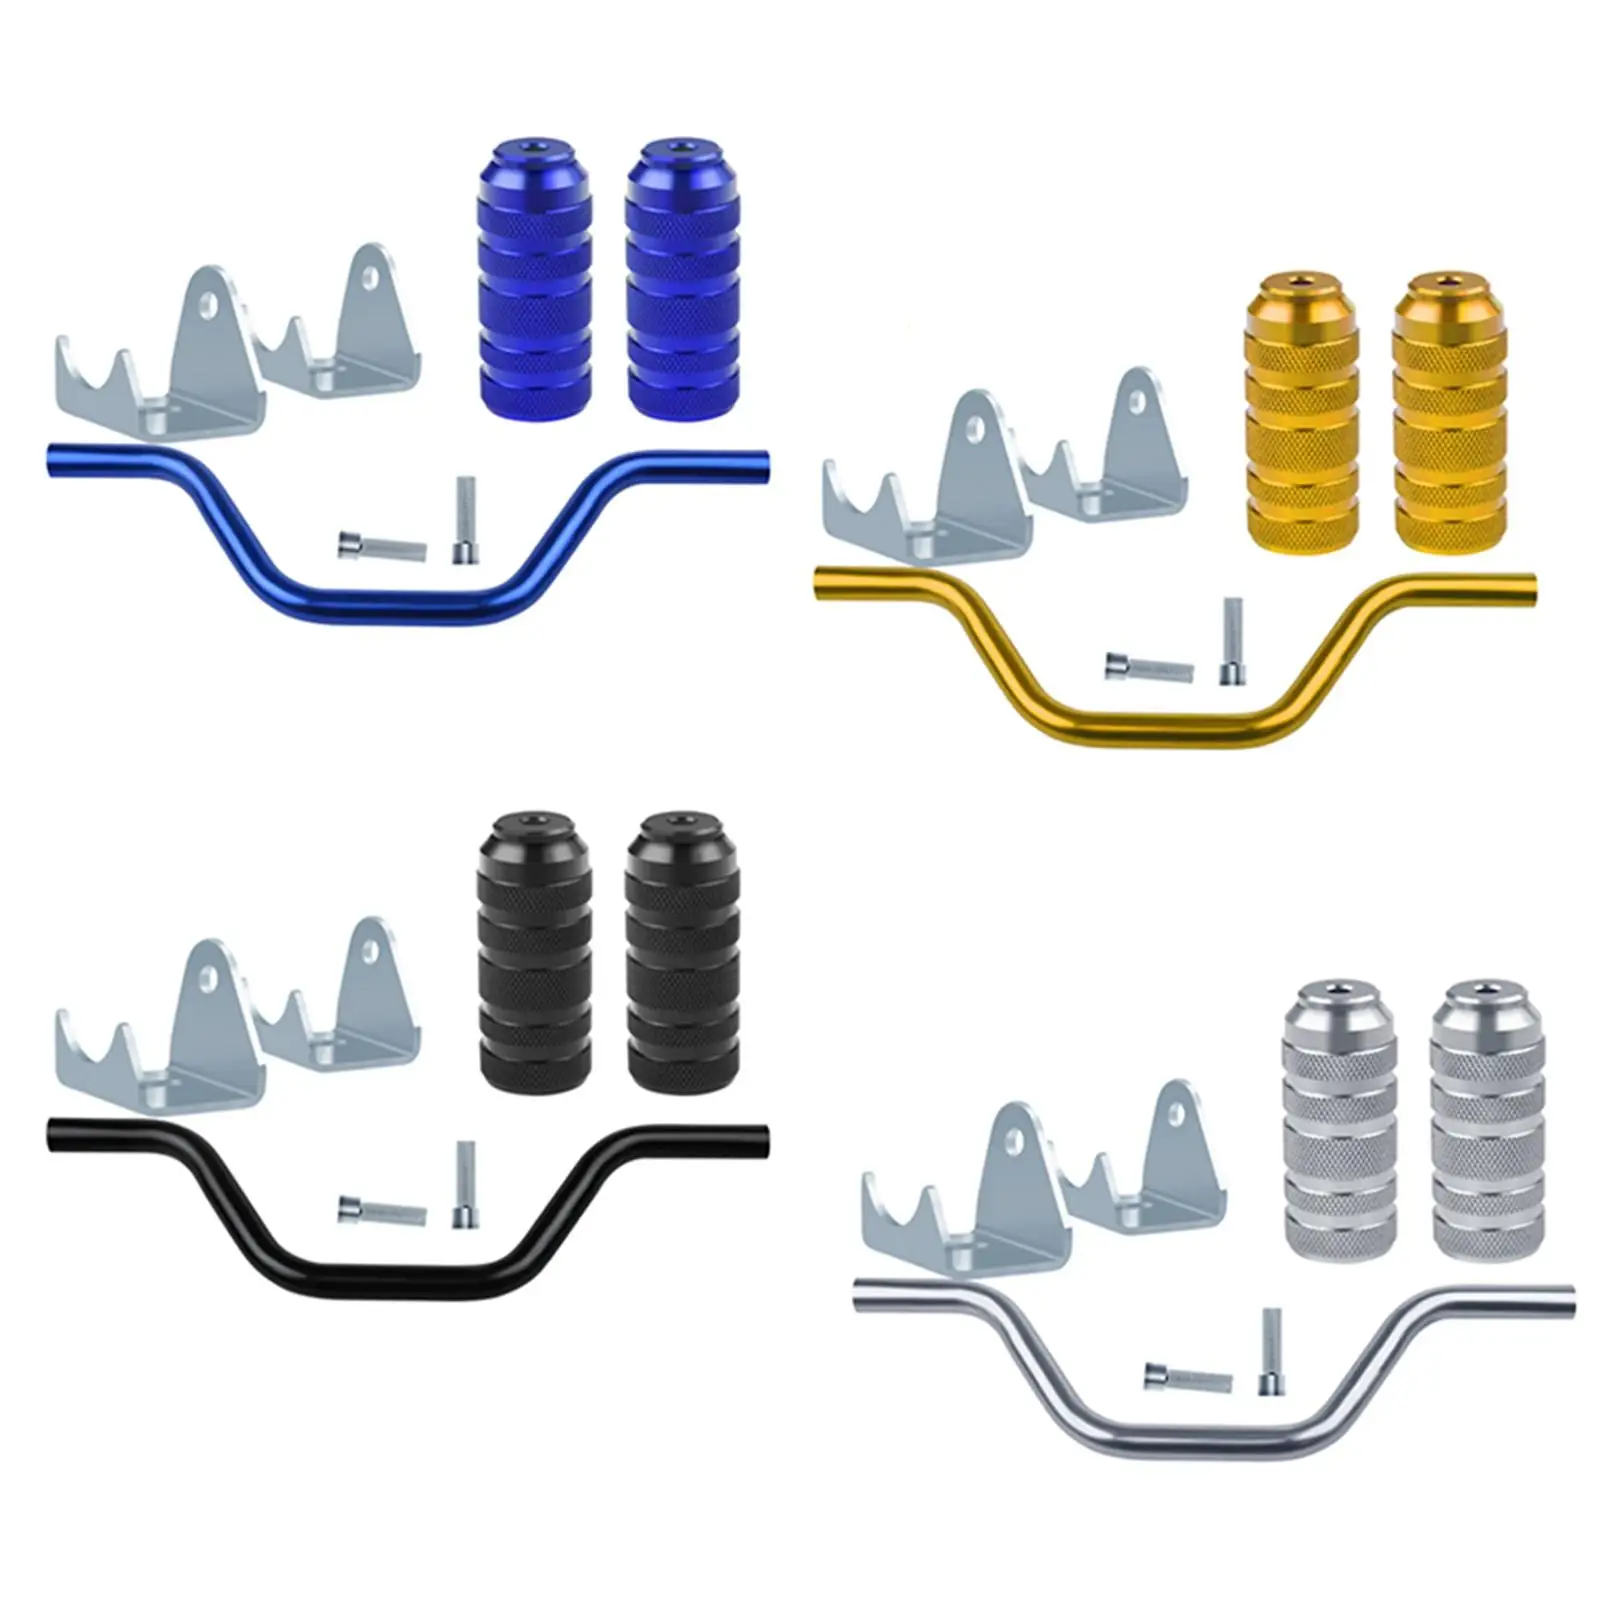 Motorcycle Foot Pegs Pedals Replace Aluminium Alloy CNC Fit for Scooter ATV